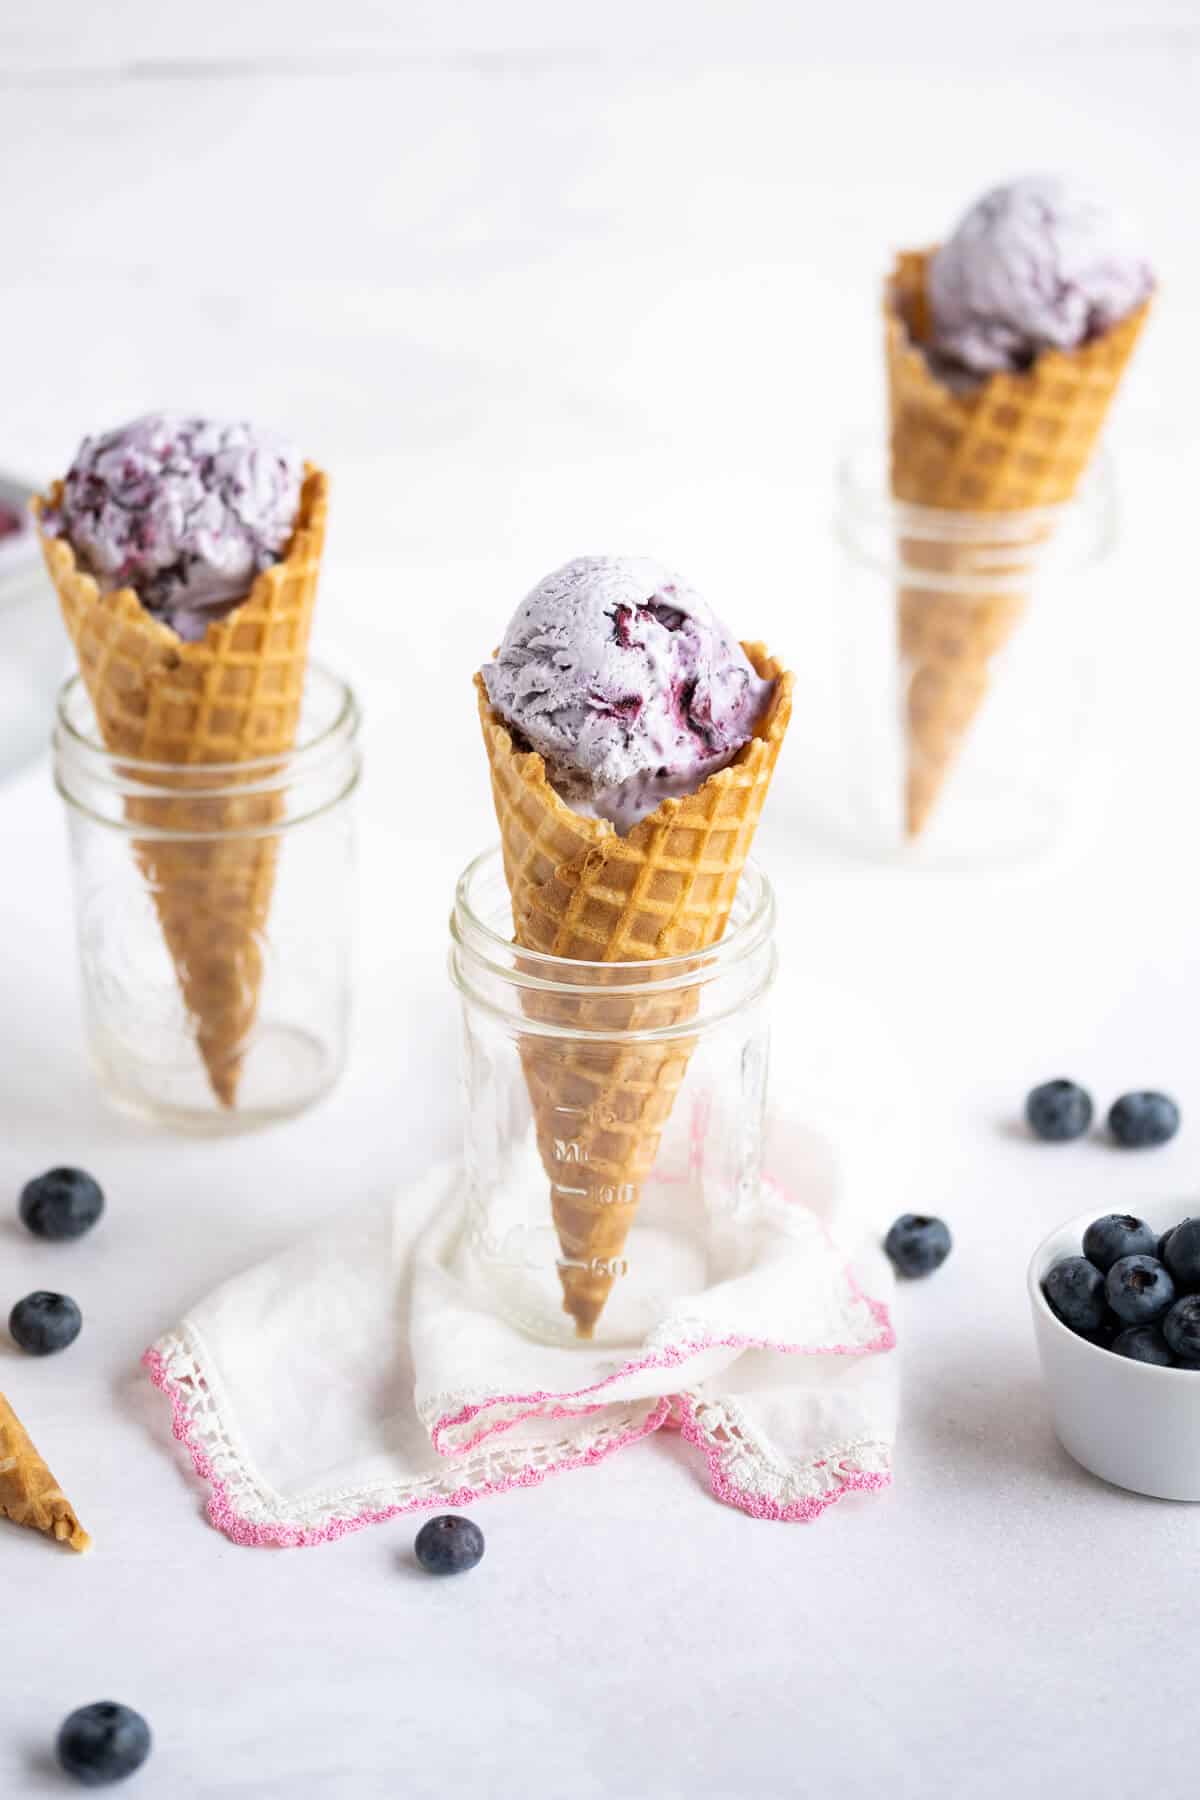 3 blueberry ice cream cones, sitting in 3 mason jars. Fresh blueberries are scattered in the foreground.